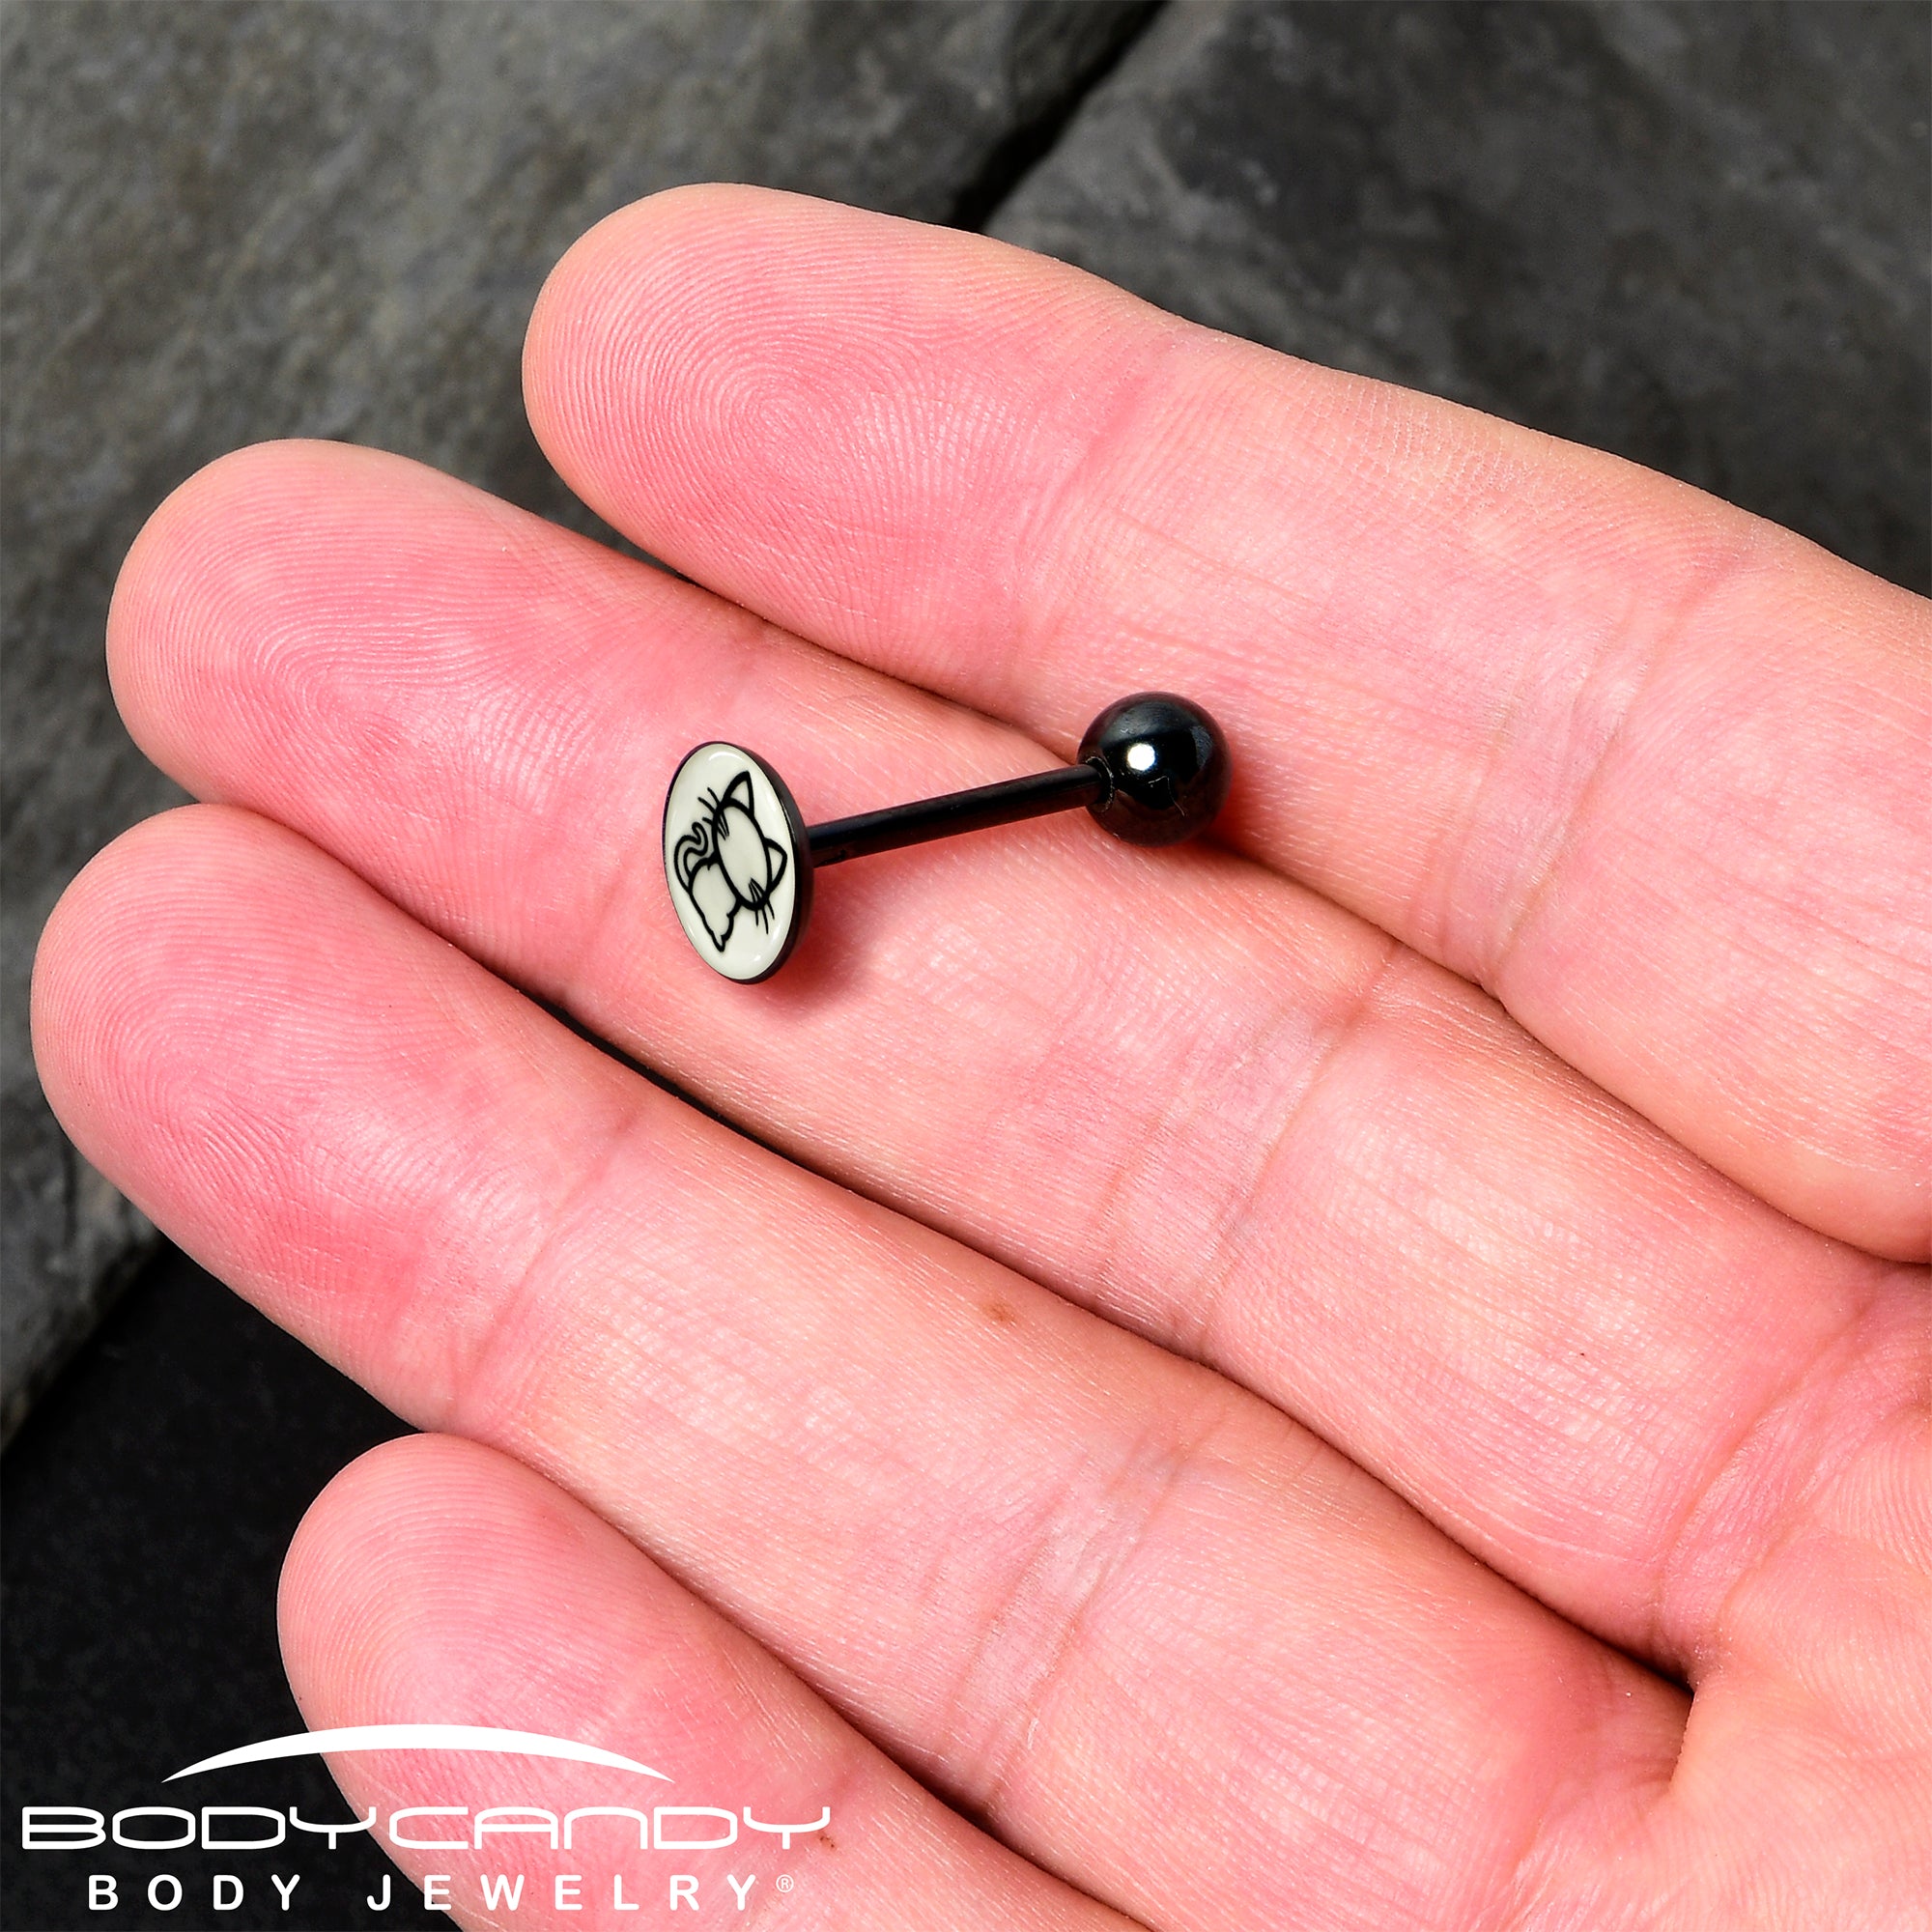 Glow in the Dark Black Anodized Kitty Cat Barbell Tongue Ring